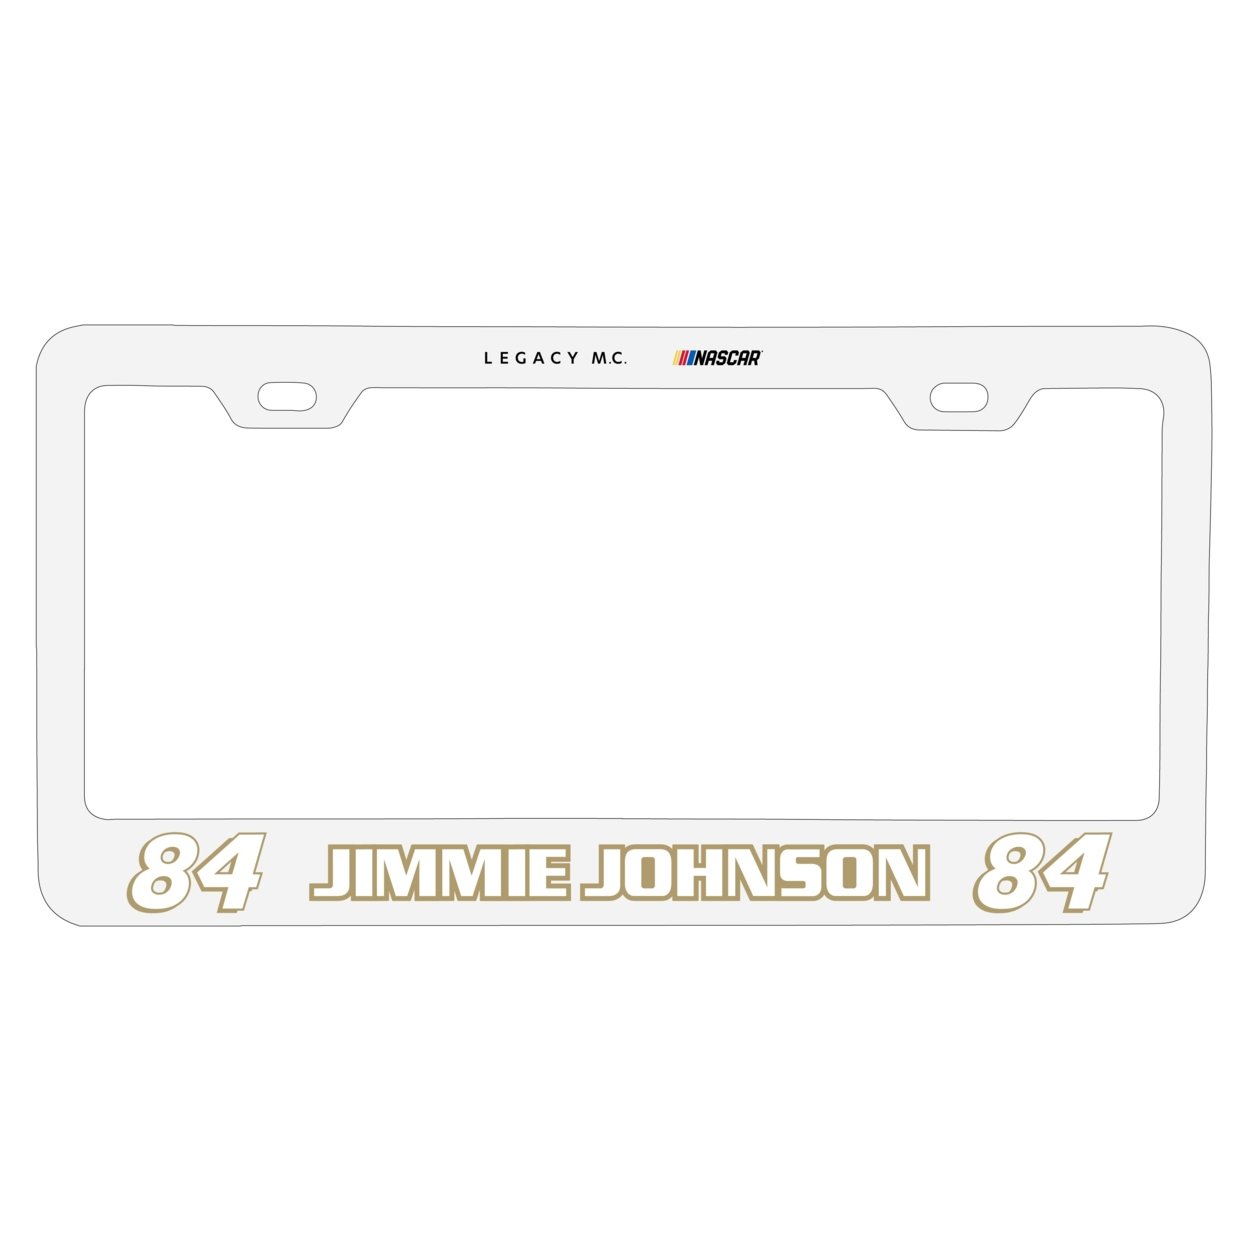 #84 Jimmie Johnson Officially Licensed Metal License Plate Frame